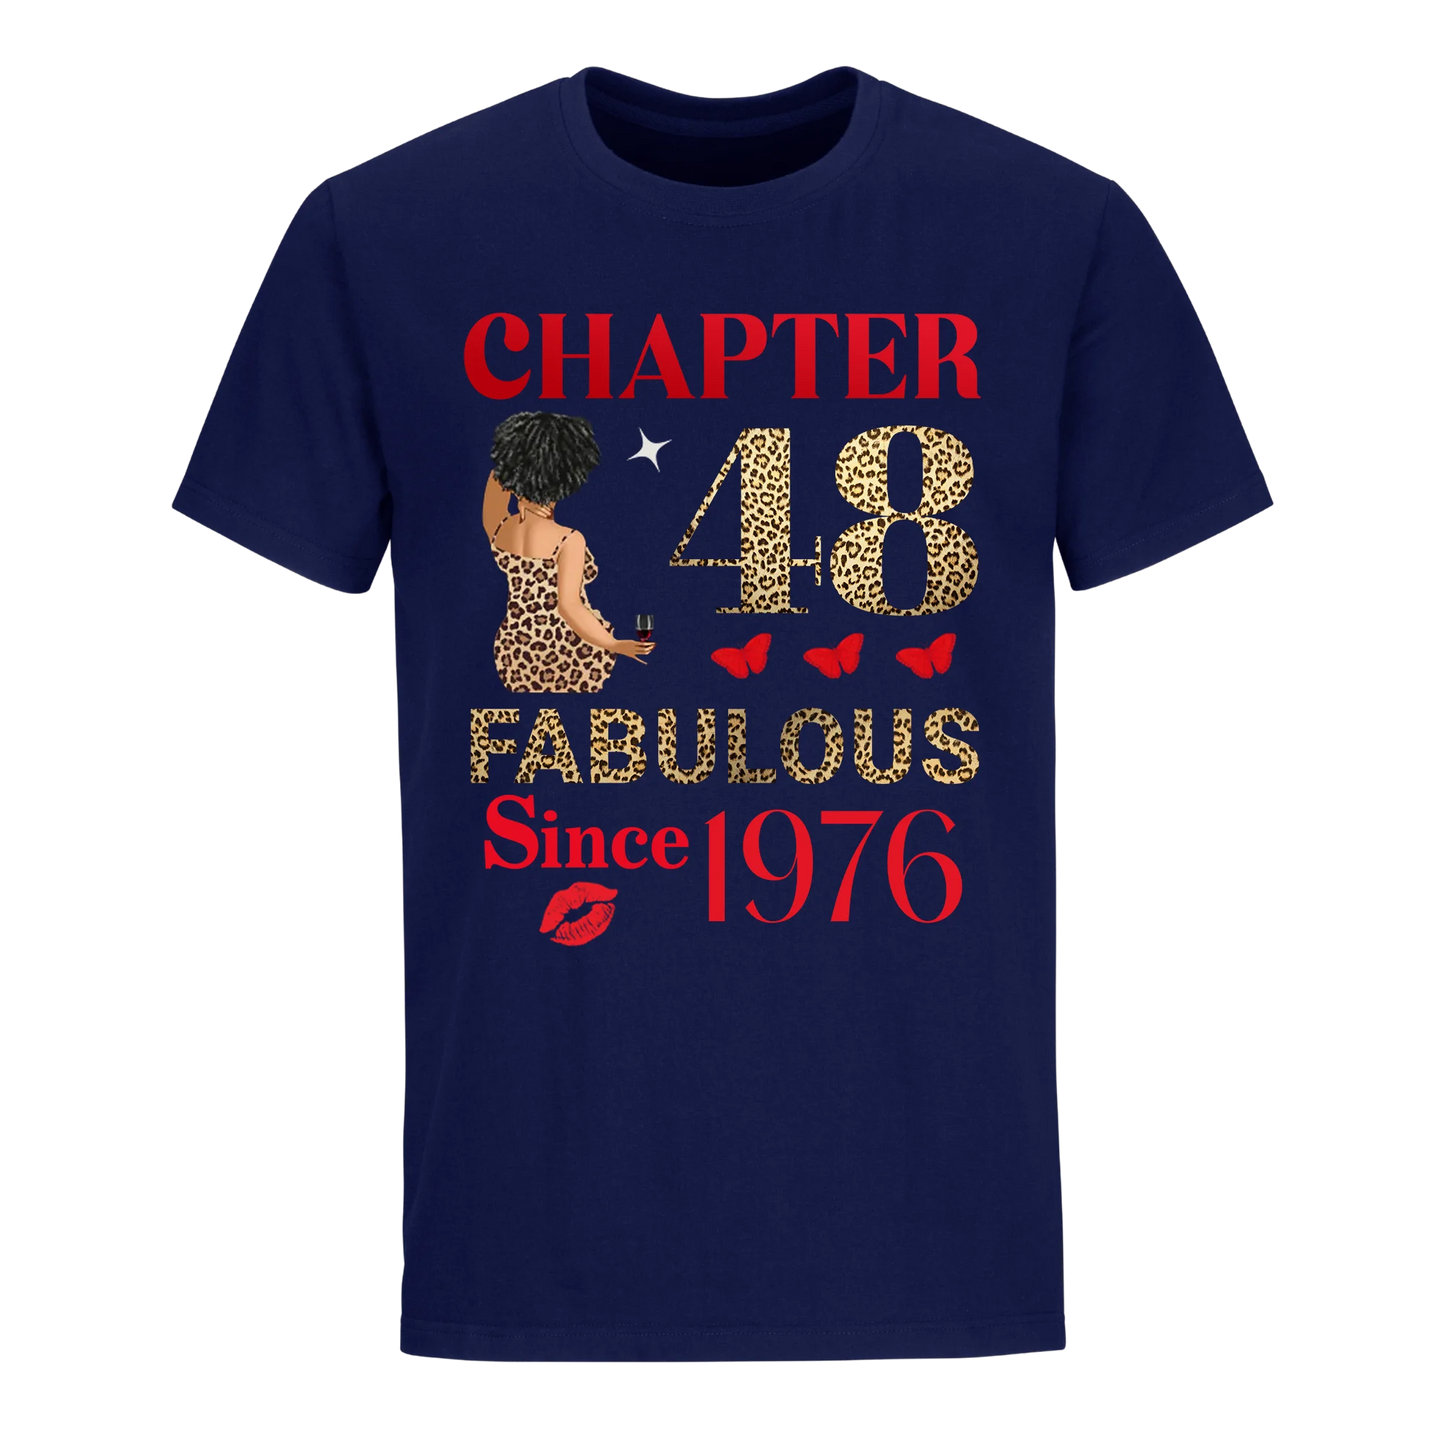 CHAPTER 48TH FAB SINCE 1976 UNISEX SHIRT